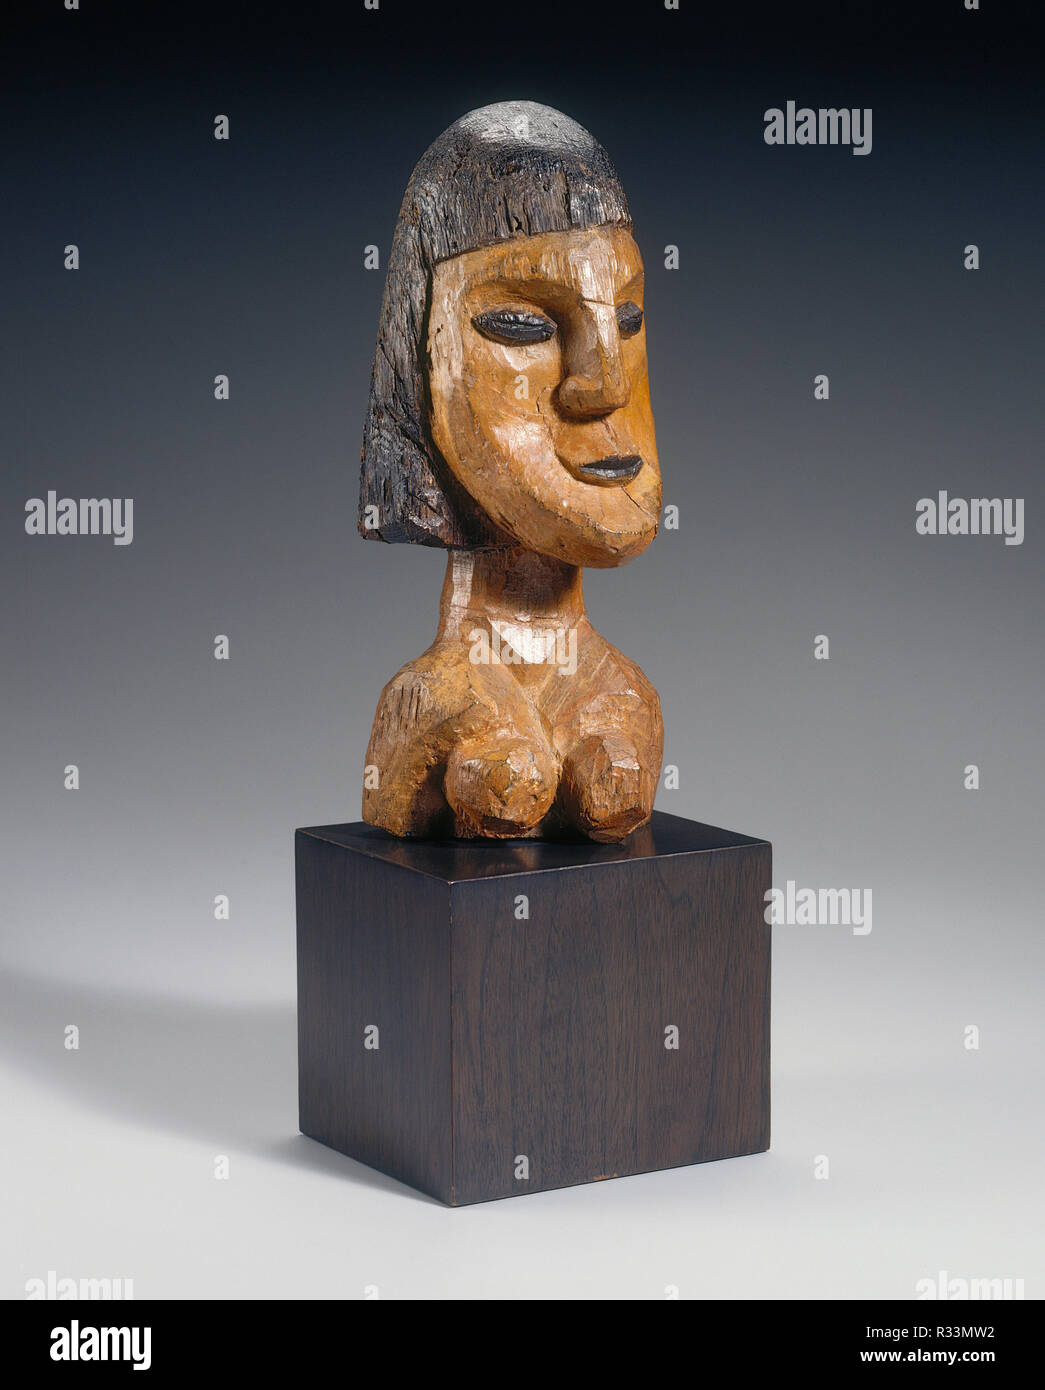 Head of a Woman. Dated: 1913. Dimensions: overall with base: 50.8 x 32.7 x 31.27 cm (20 x 12 7/8 x 12 5/16 in.)  overall without base: 35.56 x 14.92 x 16.03 cm (14 x 5 7/8 x 6 5/16 in.)  base: 15.2 x 17.8 x 15.2 cm (6 x 7 x 6 in.). Medium: carved and painted oak. Museum: National Gallery of Art, Washington DC. Author: ERNST LUDWIG KIRCHNER. Stock Photo